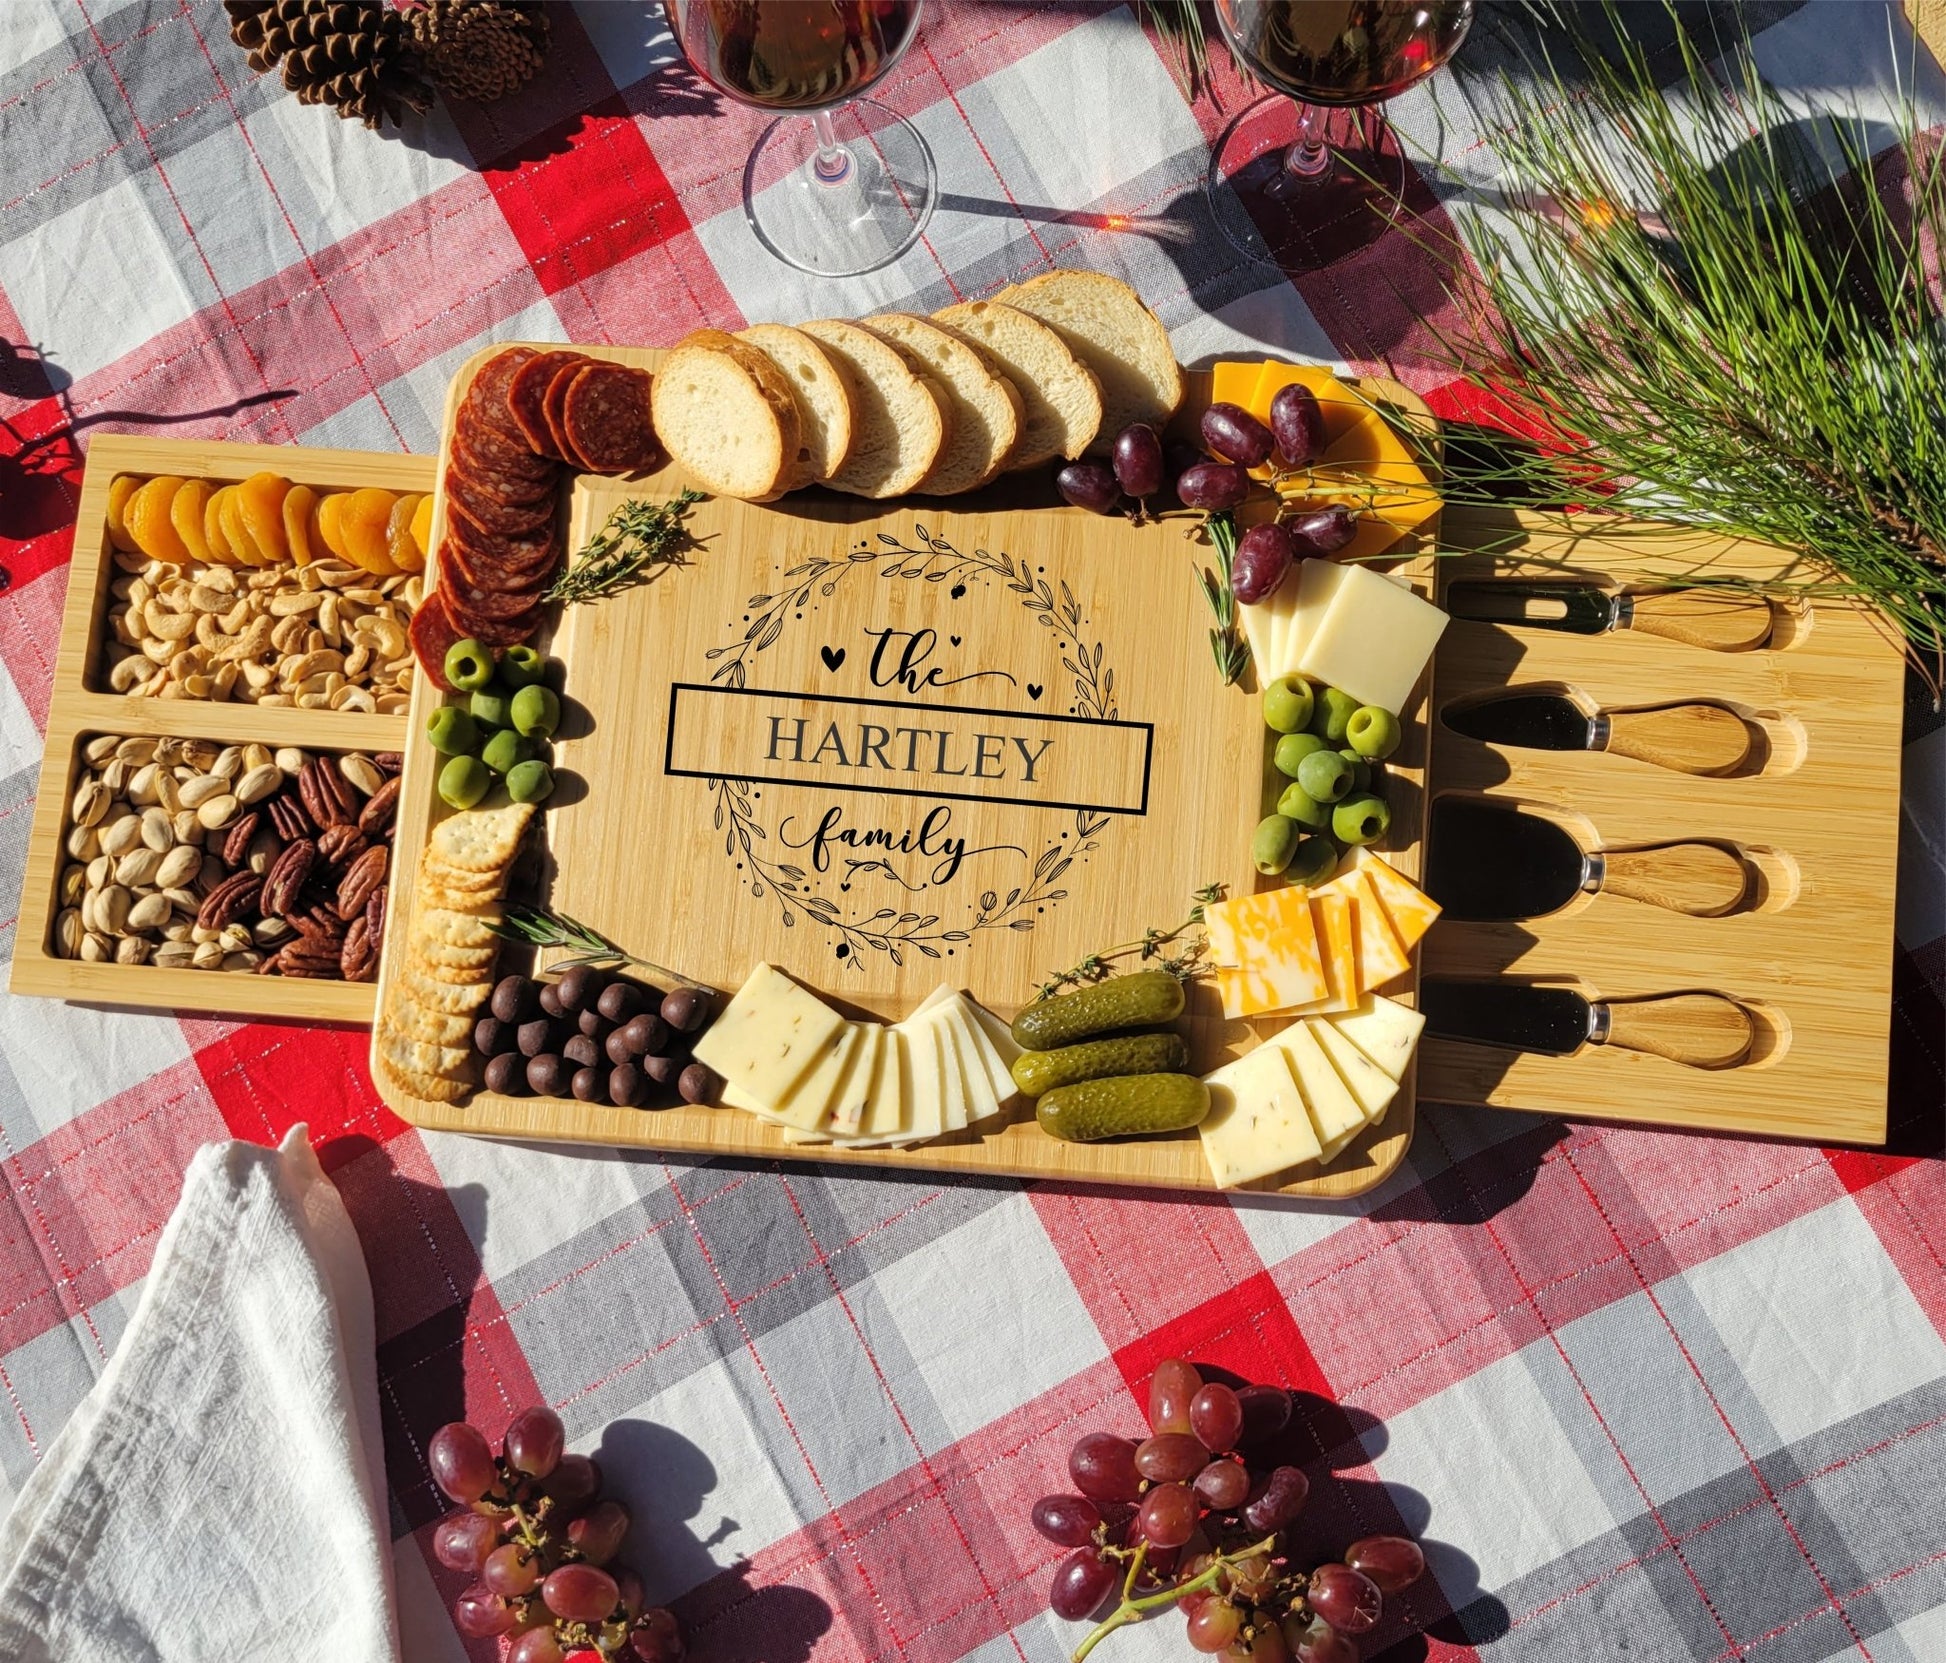 Personalized Charcuterie Board, Cutting Board Wedding Gift, Couple Christmas Gift, Bridal Shower Gift, Housewarming Gift, Anniversary Gift - Wood Unlimited#